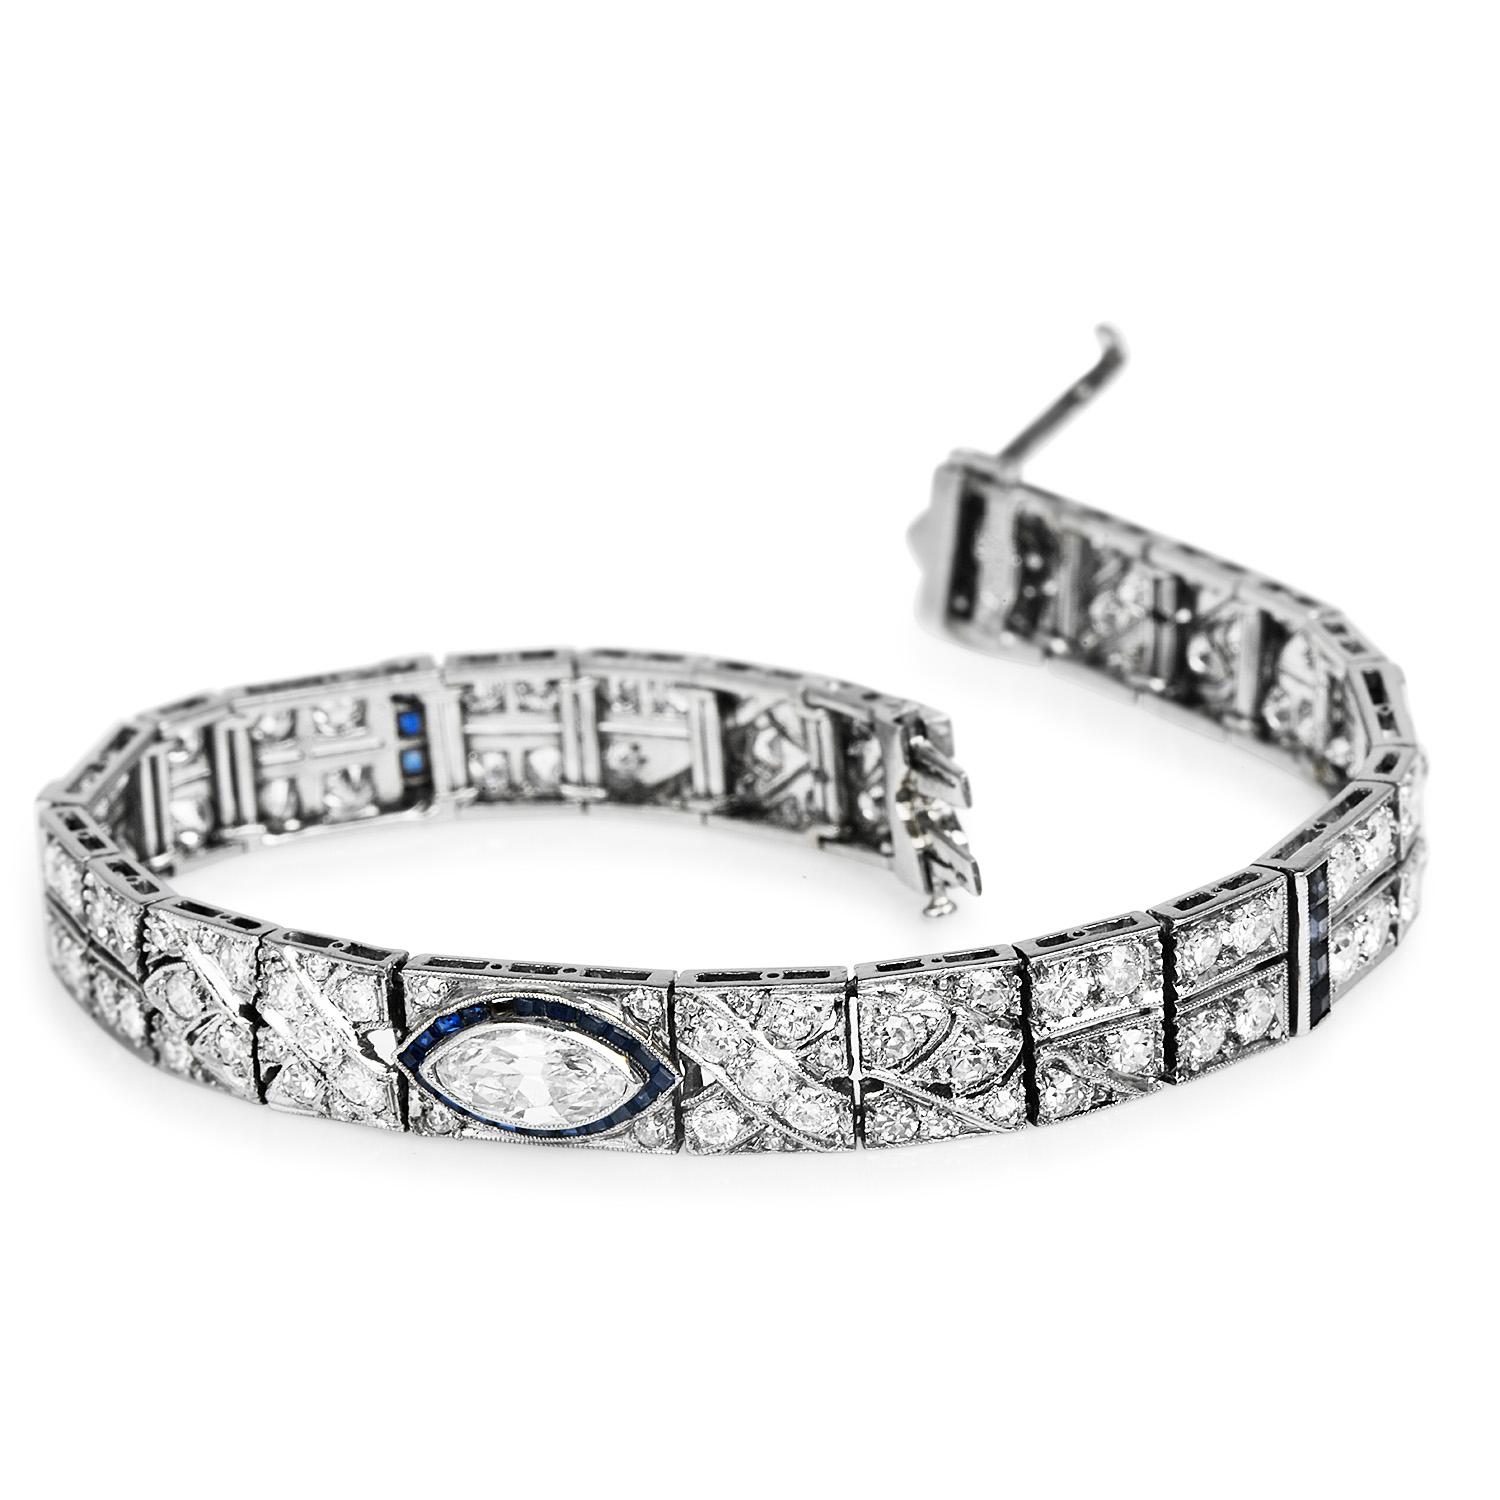 A geometric design with a superb sparkle in an elegant Platinum setting, this Art Deco Bracelet is the perfect classic yet unique piece,

The center of this antique art deco bracelet is 1 Marquise cut diamond, bezel-set,

weighing appx. 0.85 carats.